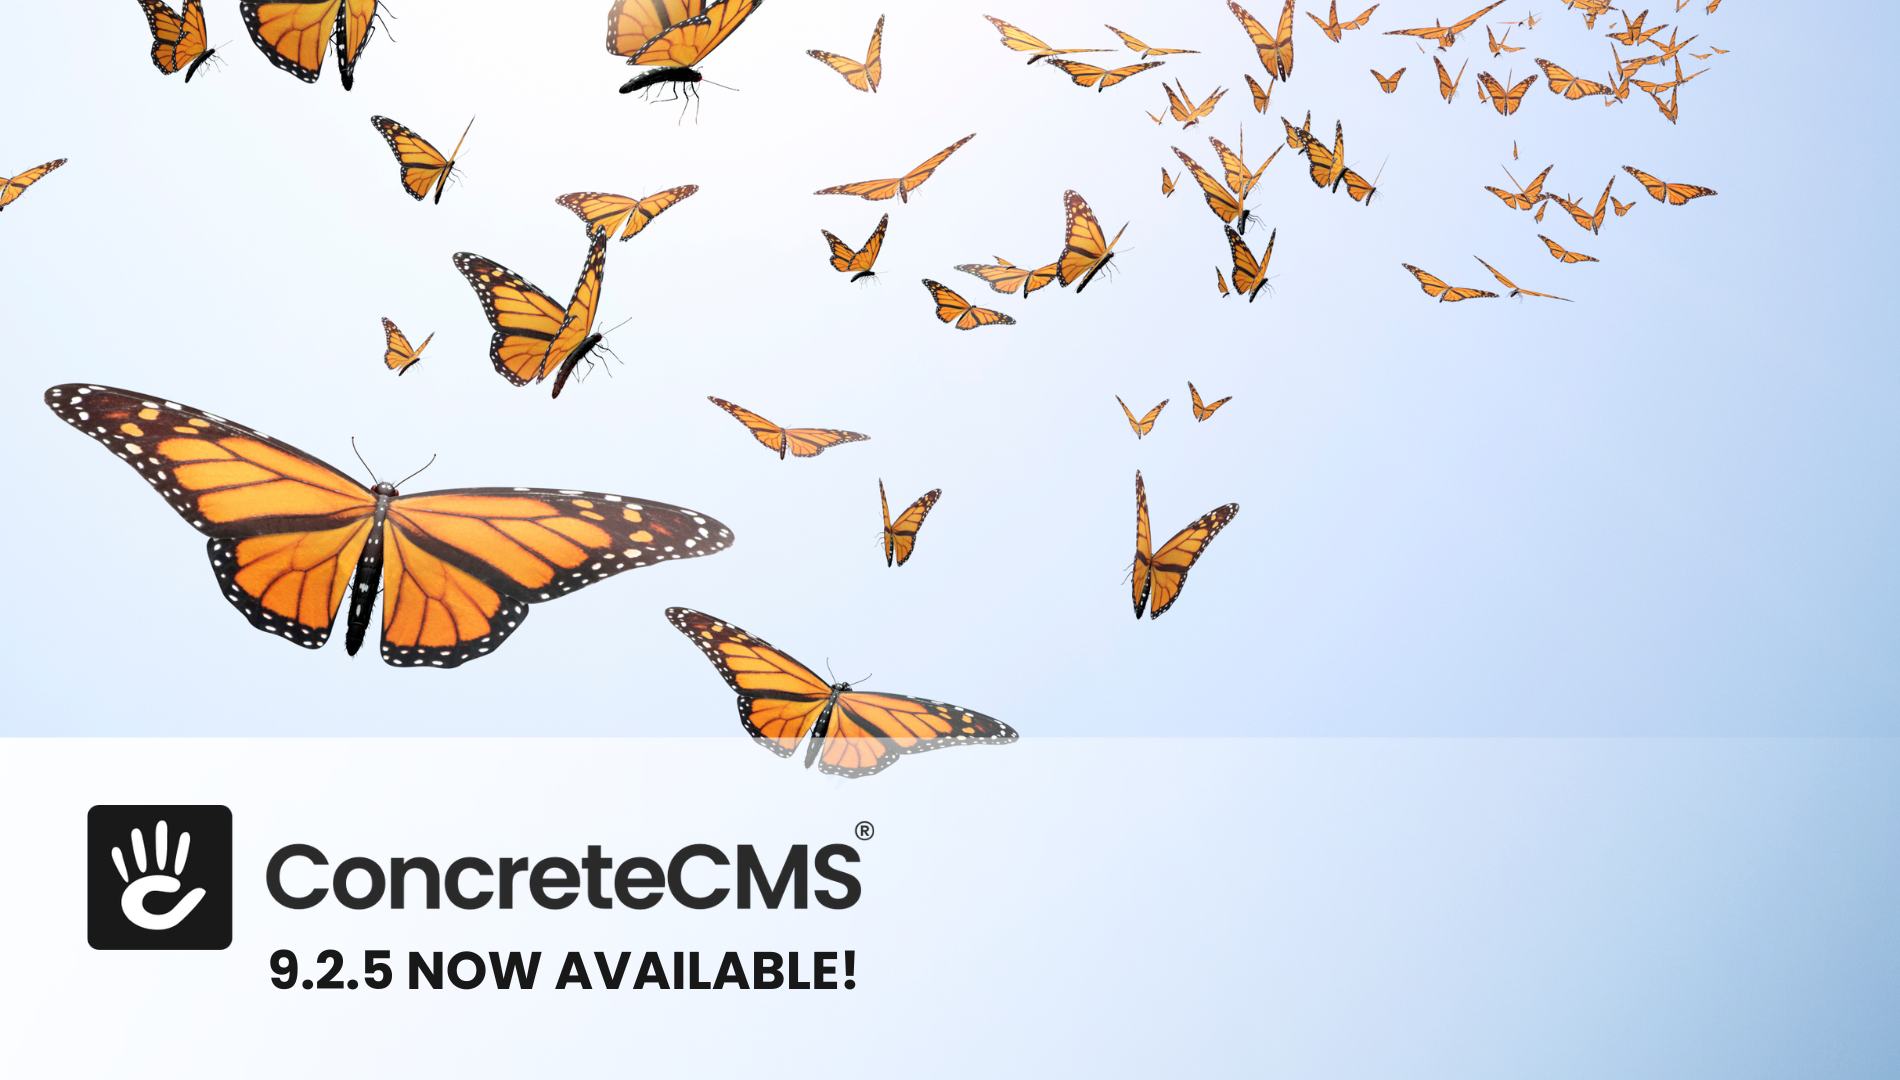 Concrete CMS 9.2.5 is Now Available!